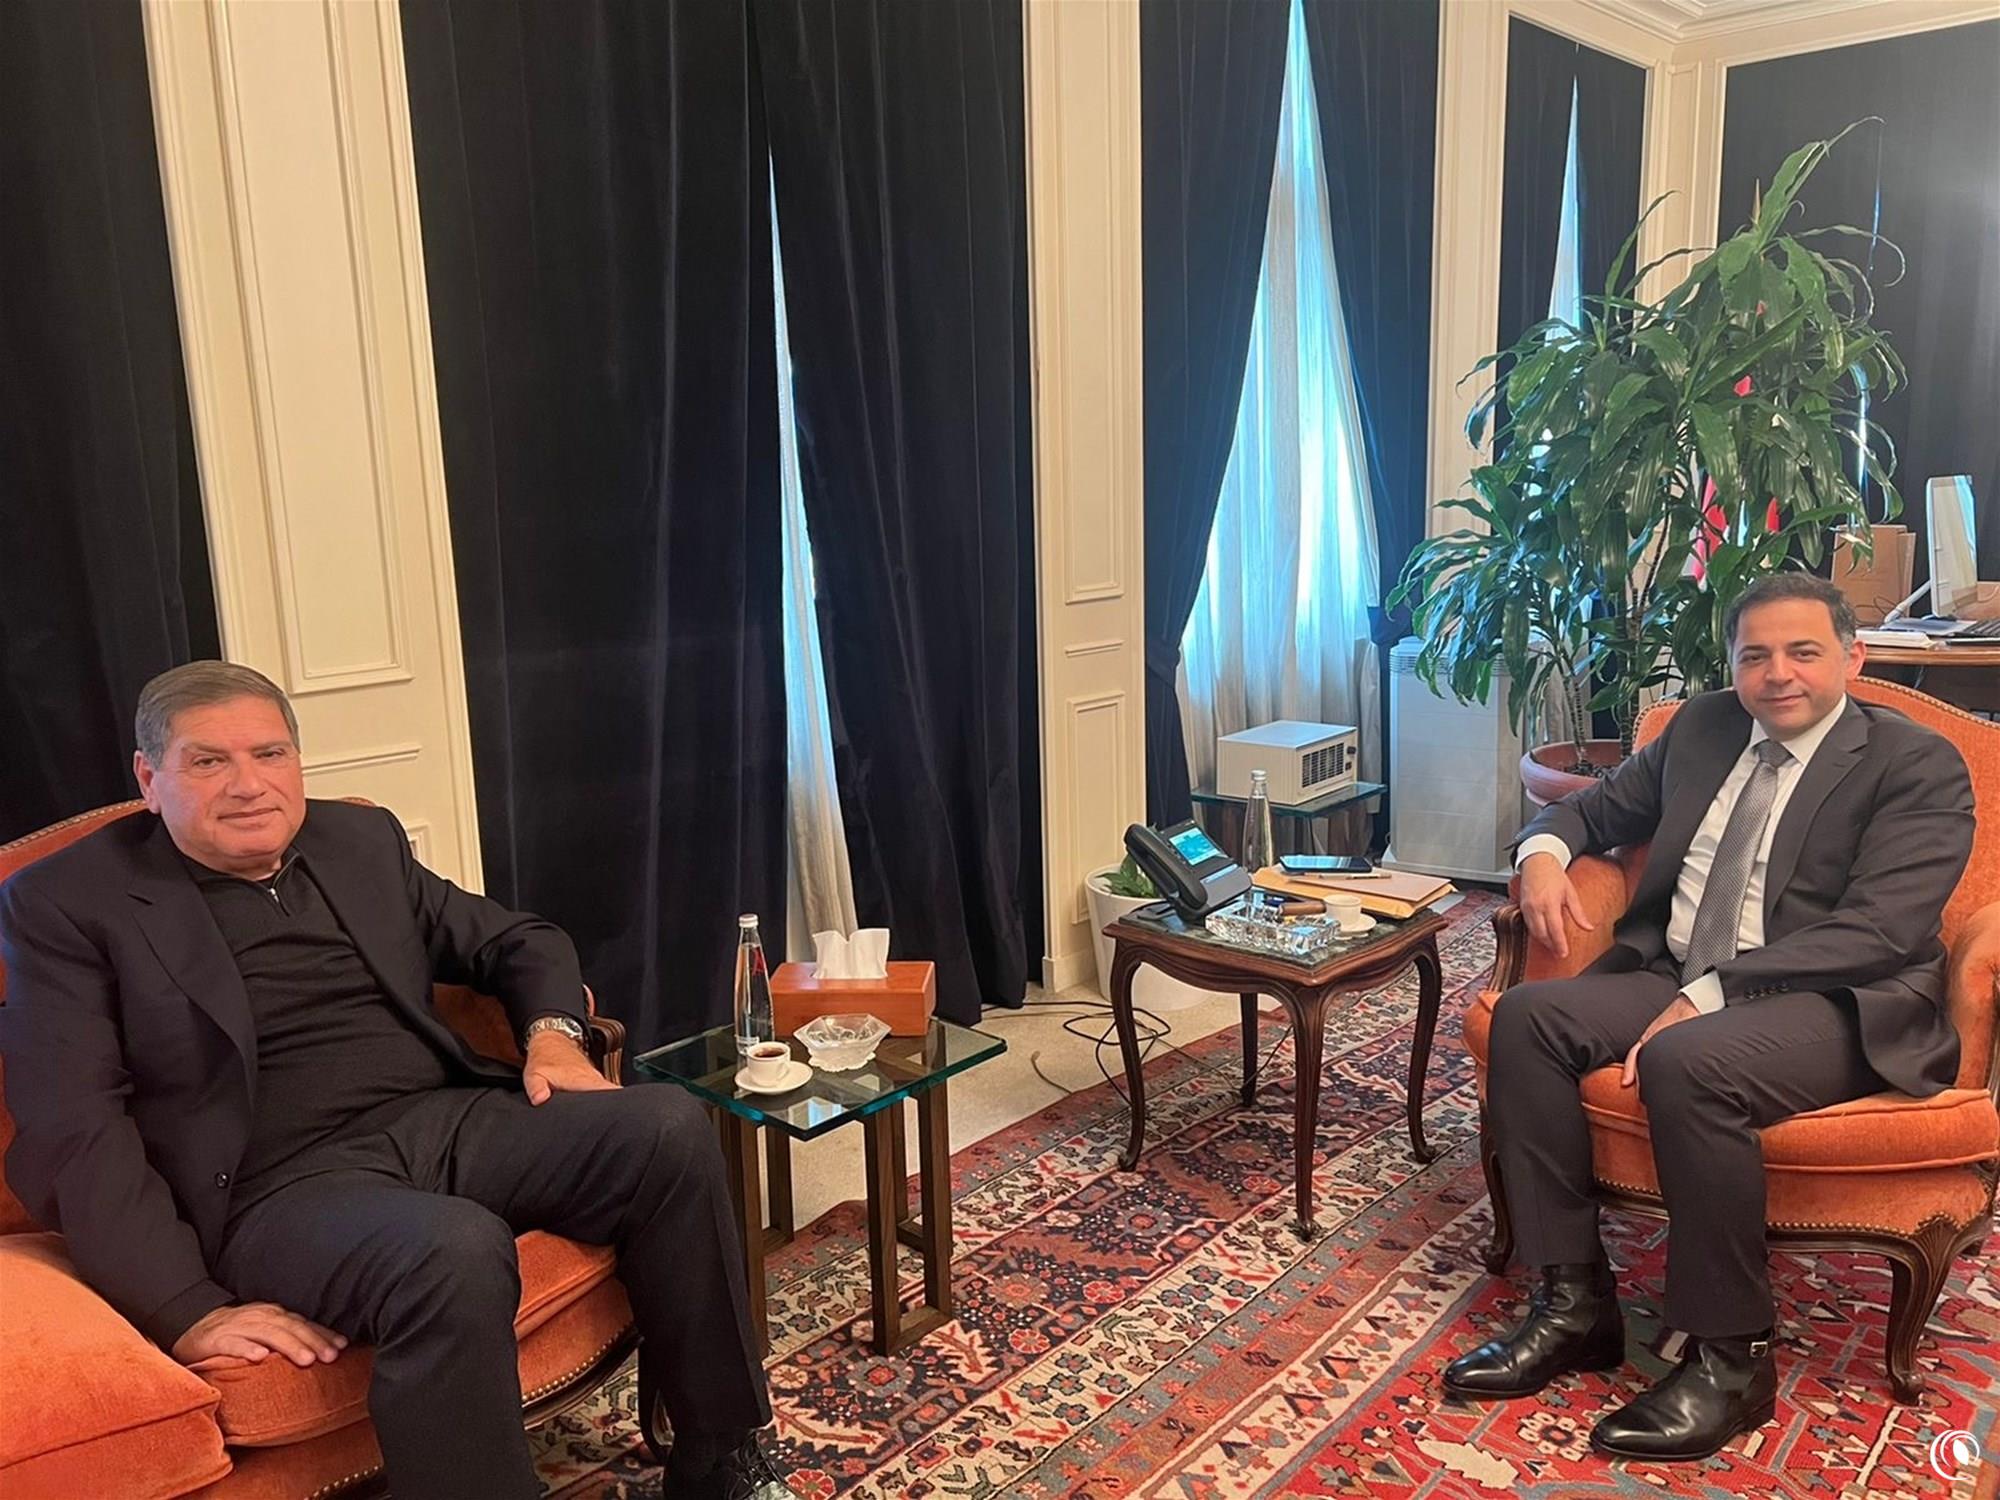  The Acting Governor of the Central Bank of Lebanon Meets with the Regie’s President and Director General 